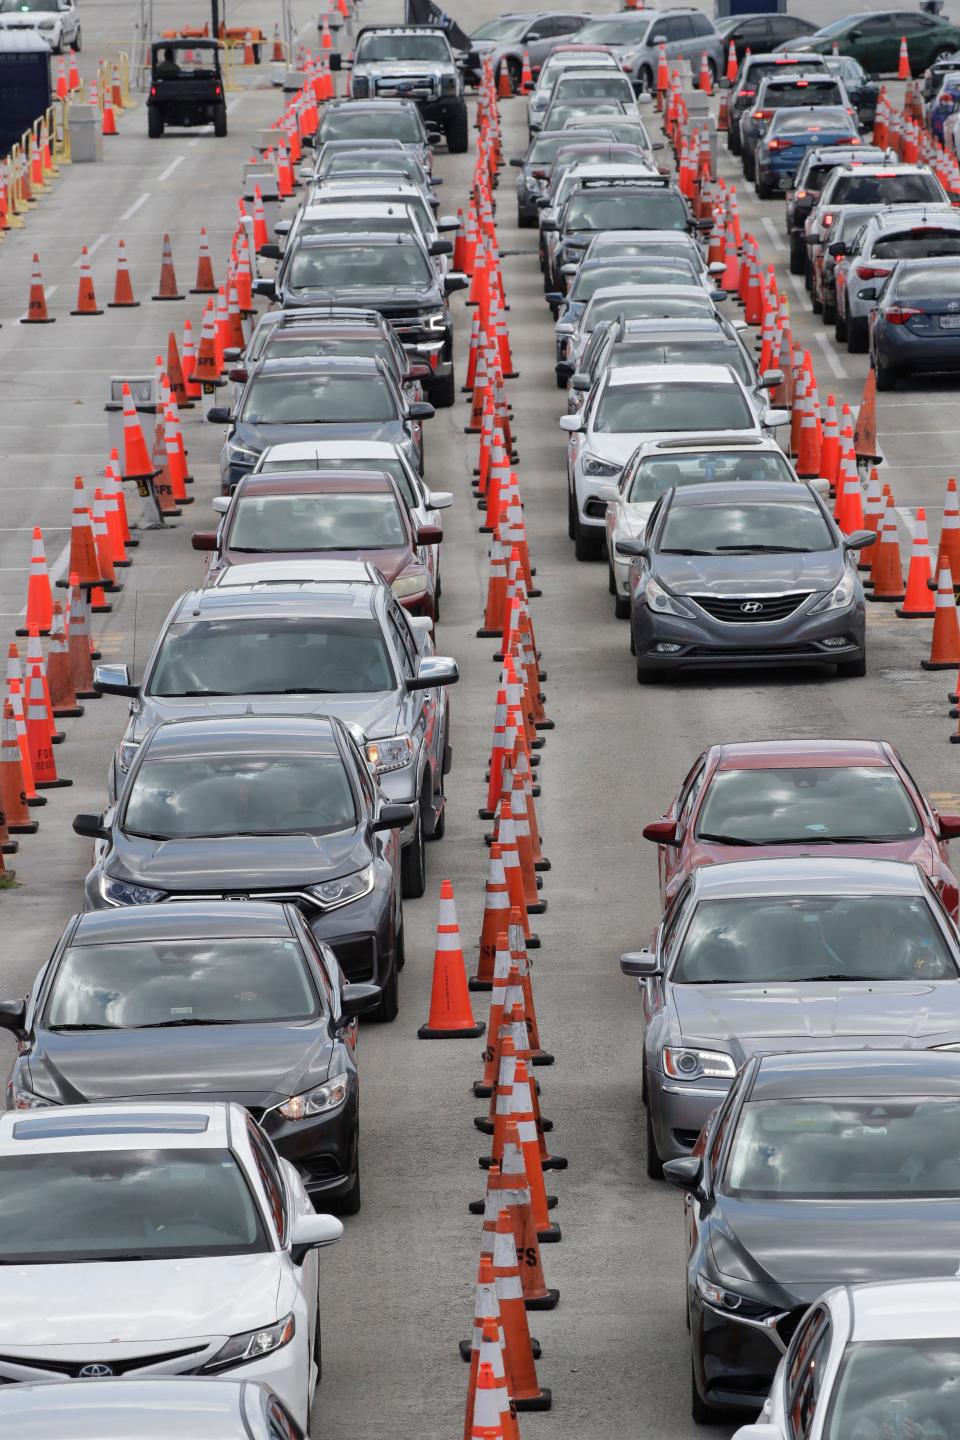 Cars wait in line at a drive-thru COVID-19 testing site July 8 in Miami Gardens, Fla. On July 13, Florida reported the largest single-day increase in positive coronavirus cases in any one state since the beginning of the pandemic.